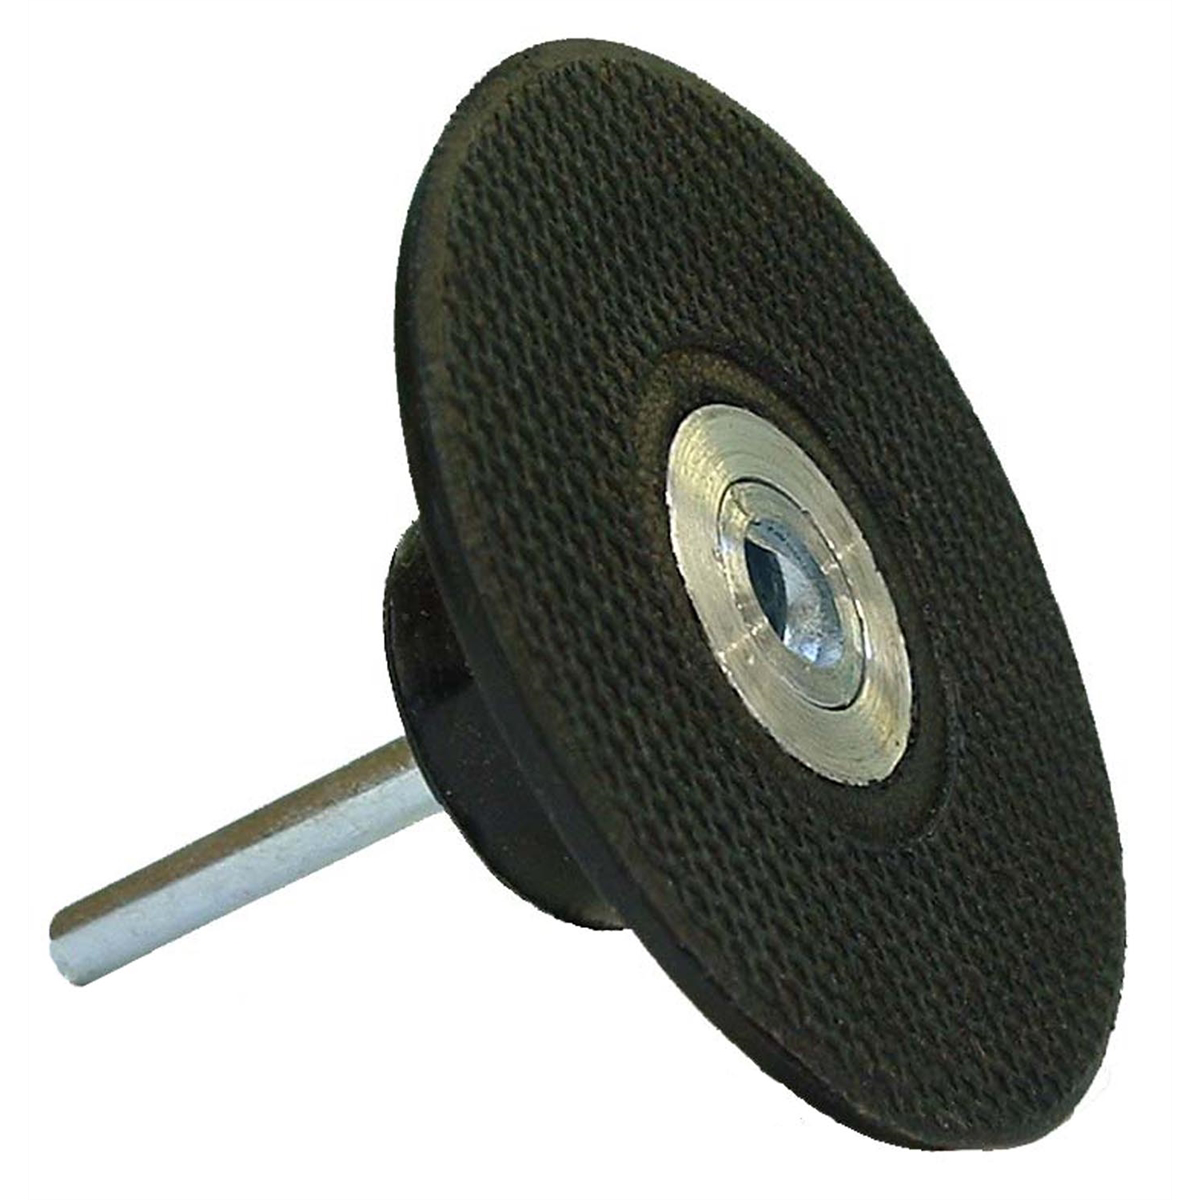 3" Holding Pad for Surface Treatment Disc